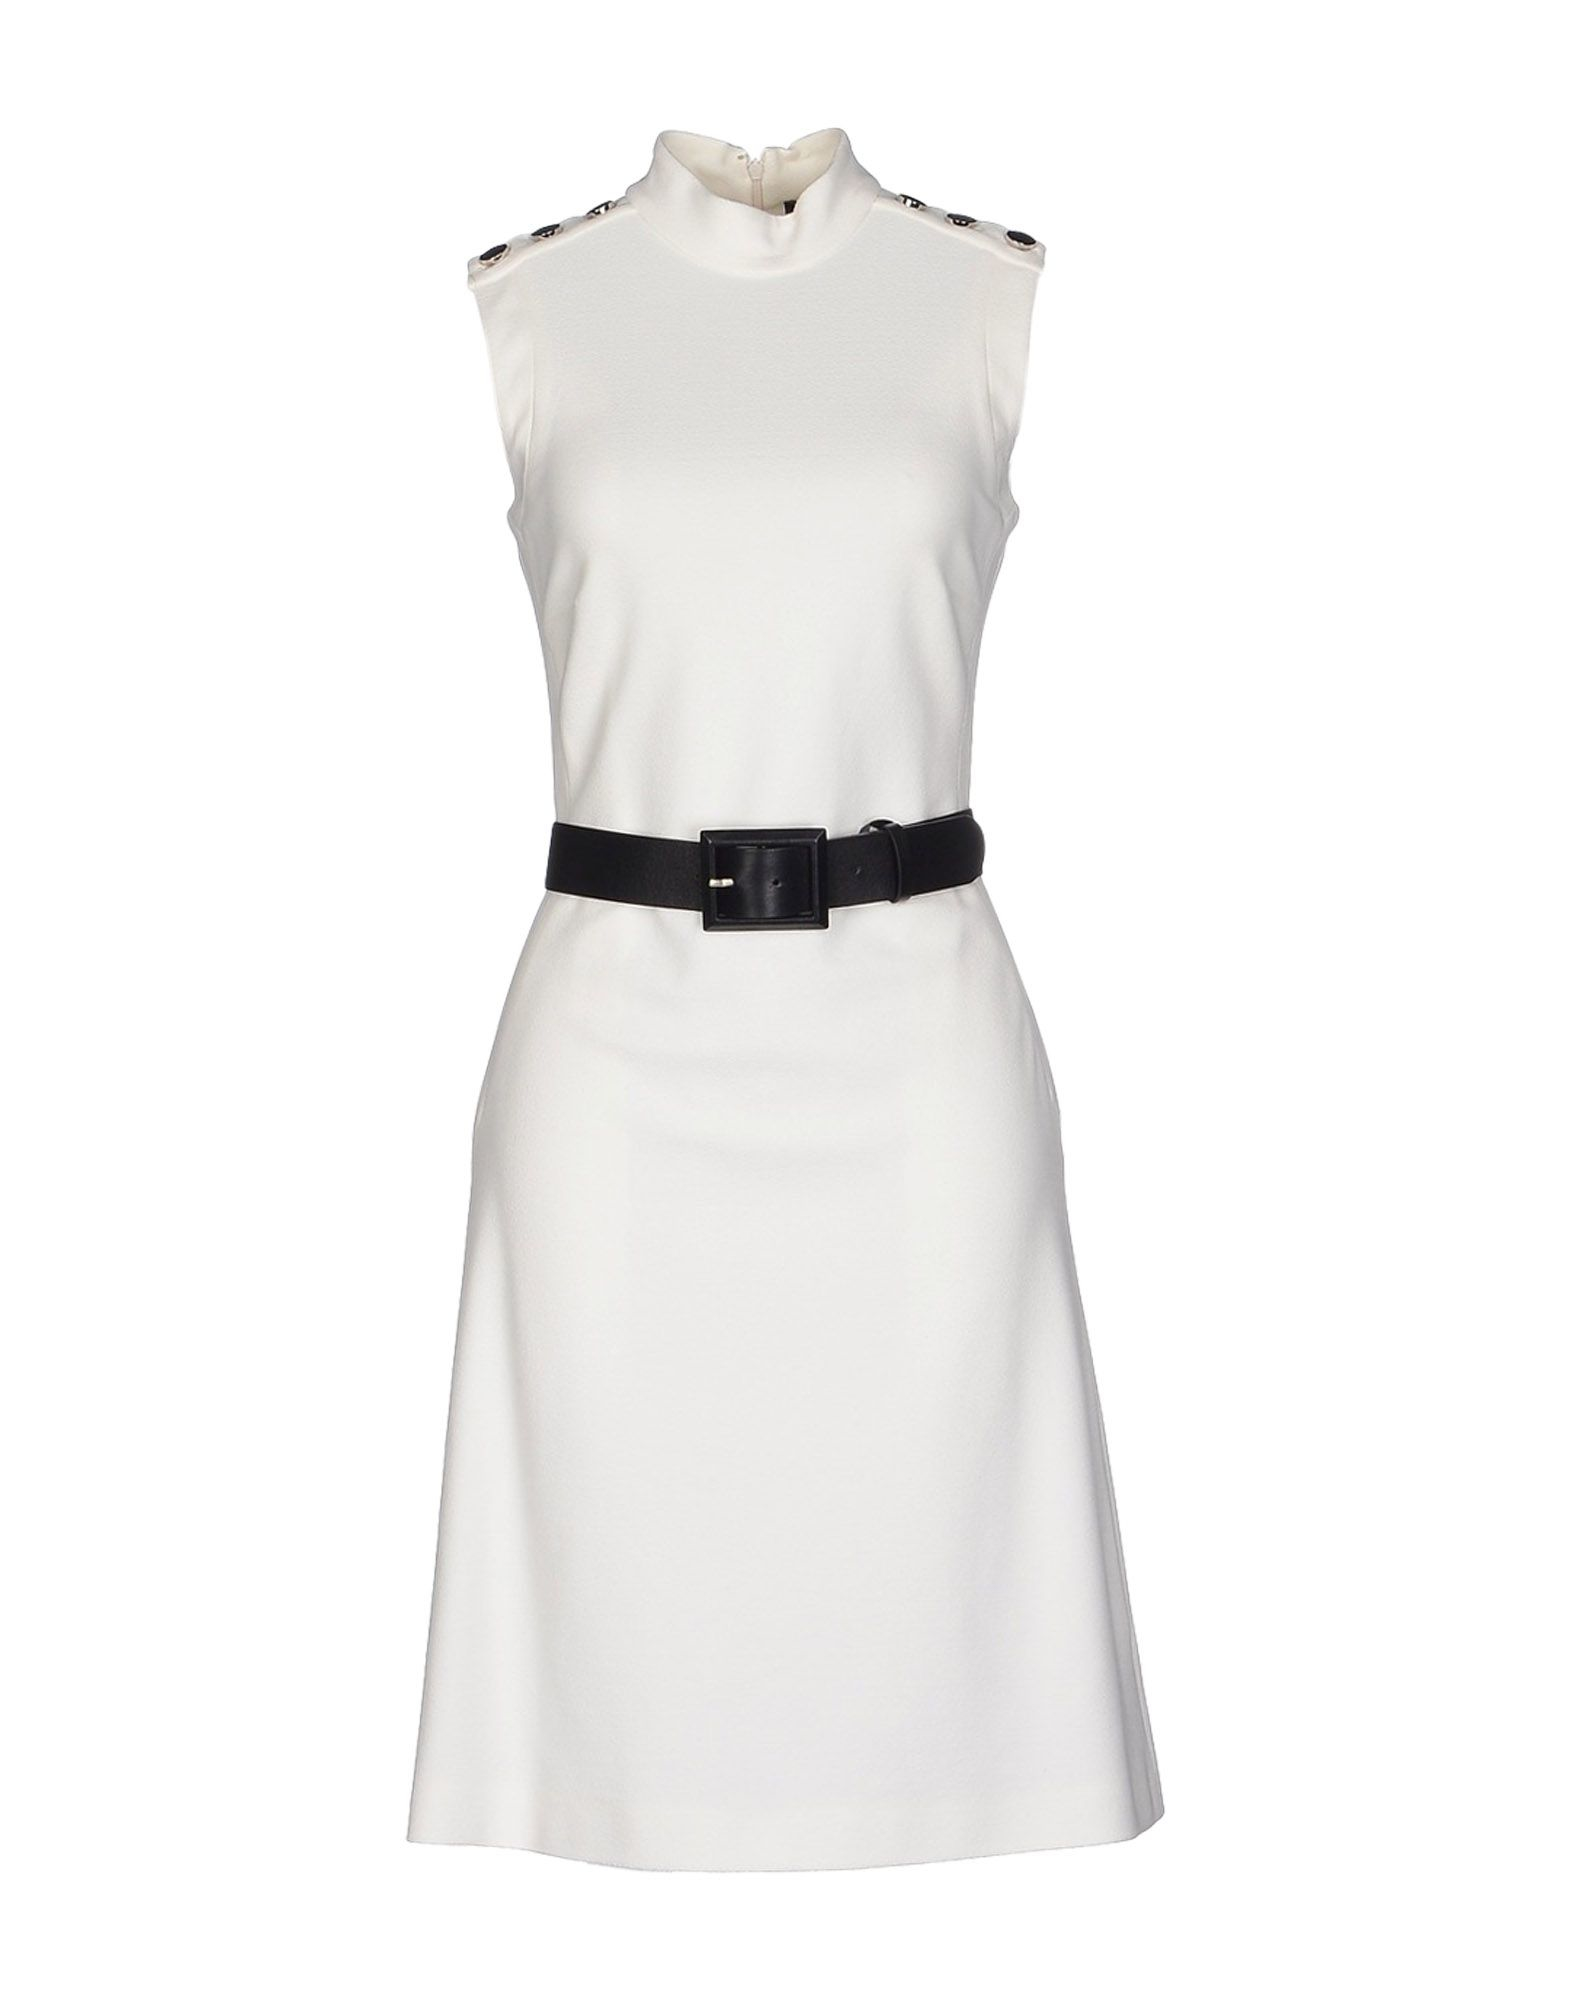 Lyst - Gucci Short Dress in White